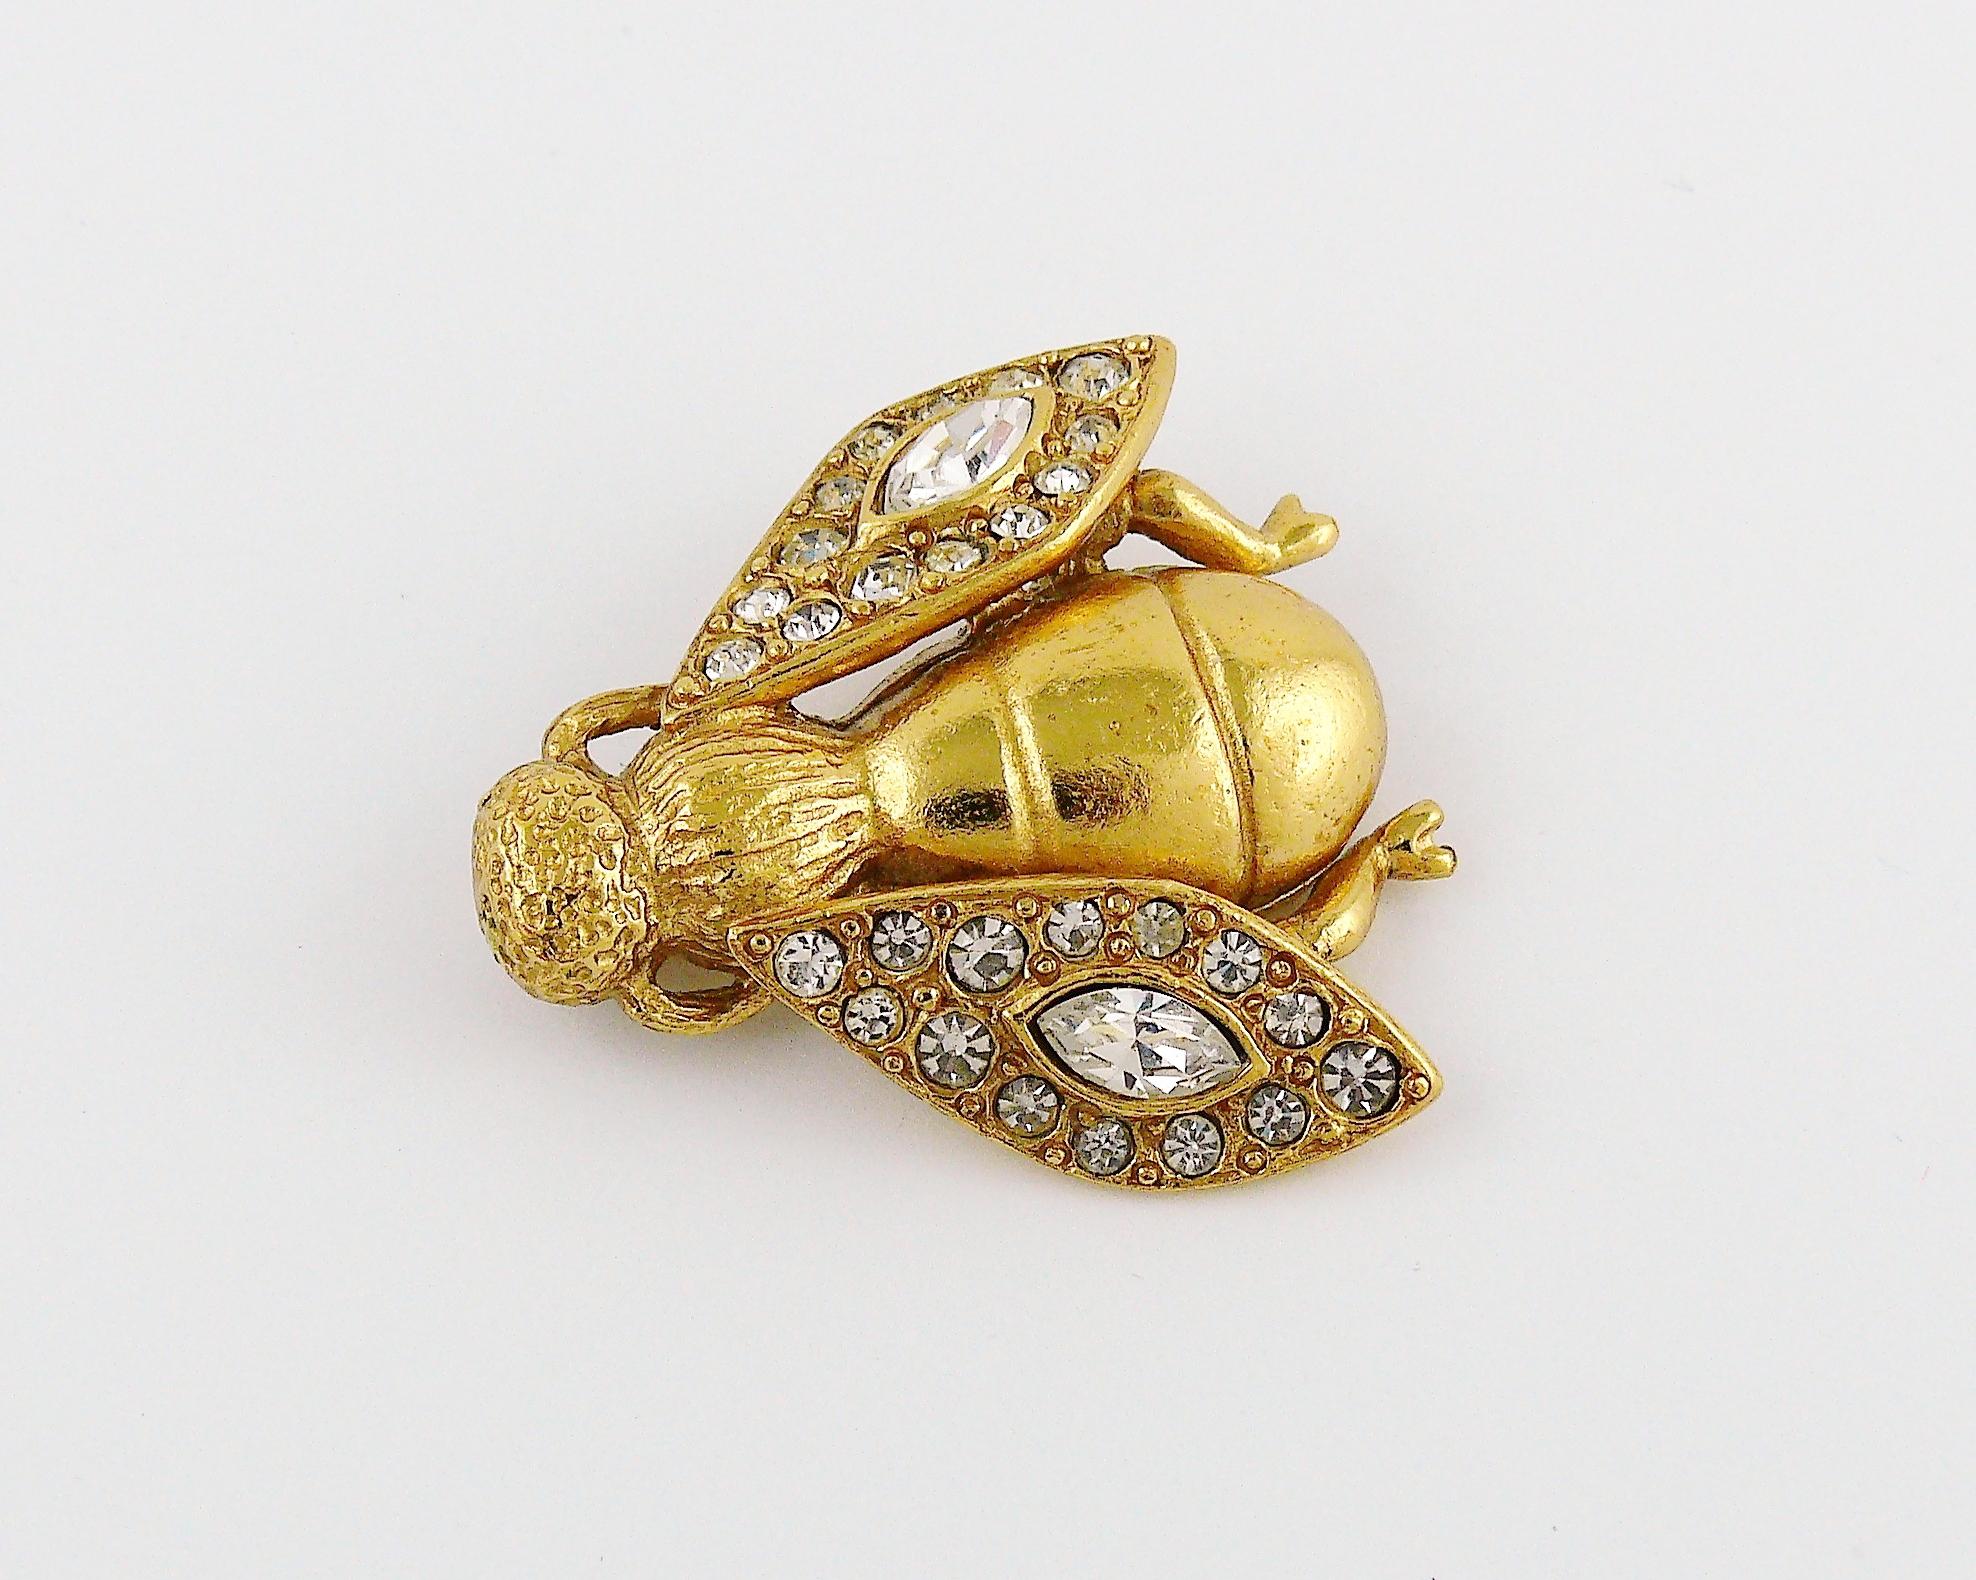 Women's Christian Dior Boutique Iconic Jewelled Bee Brooch